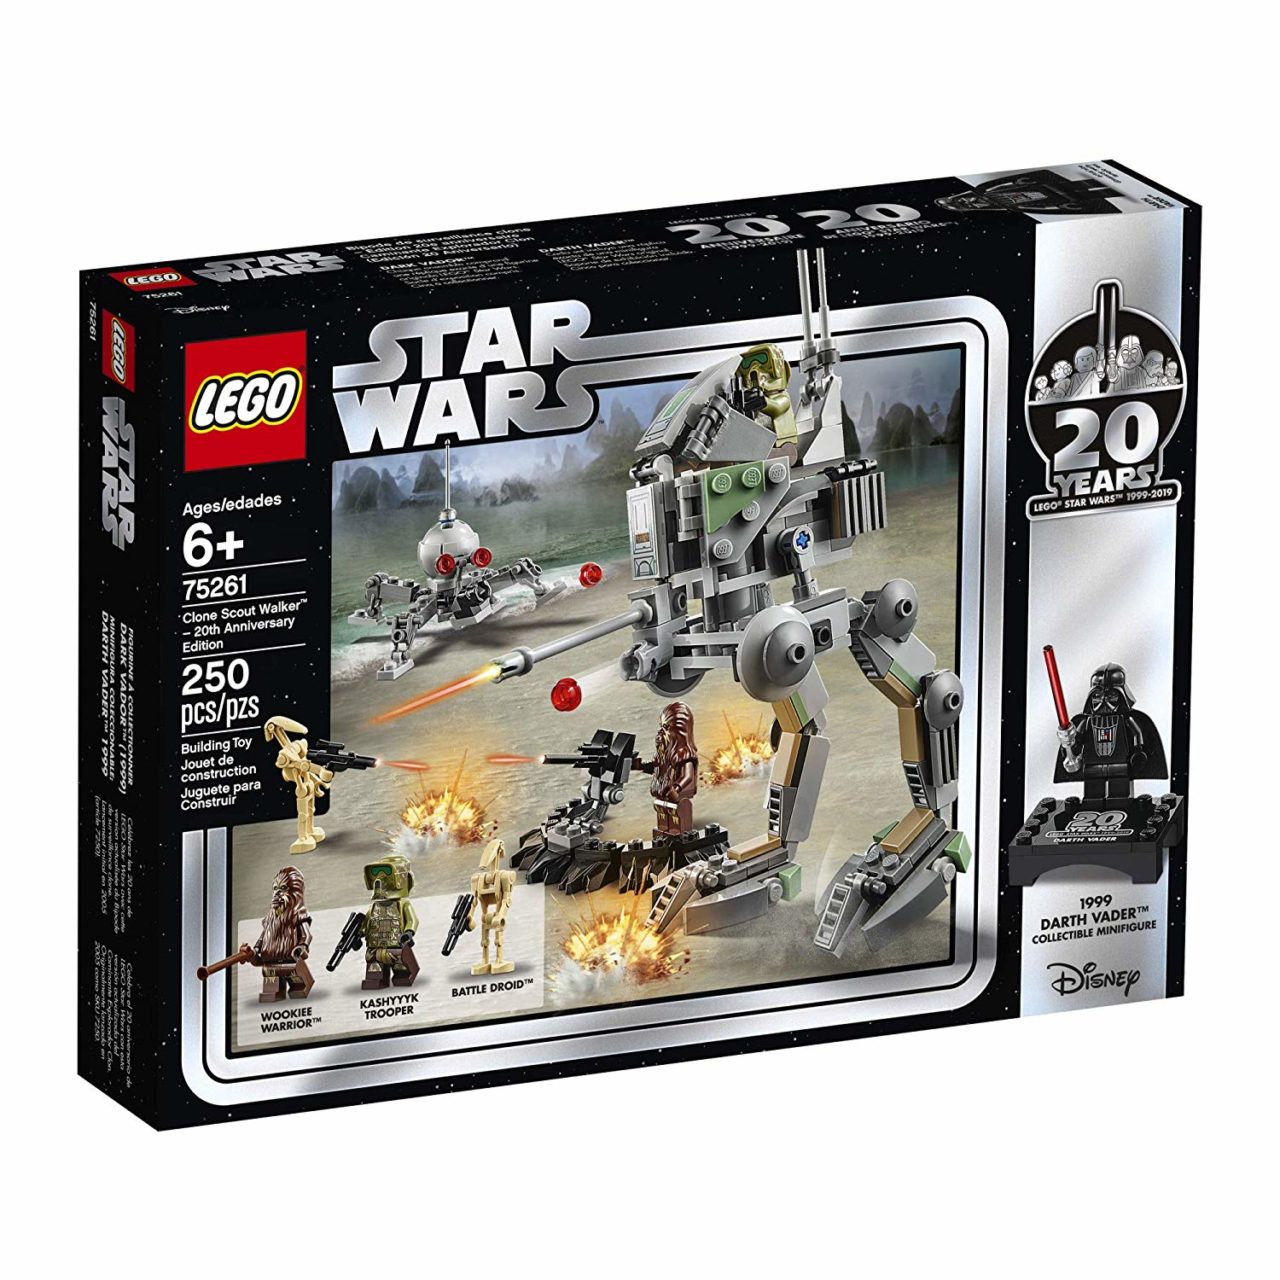 Some LEGO Star Wars Anniversary Sets Heavily Discounted - FBTB